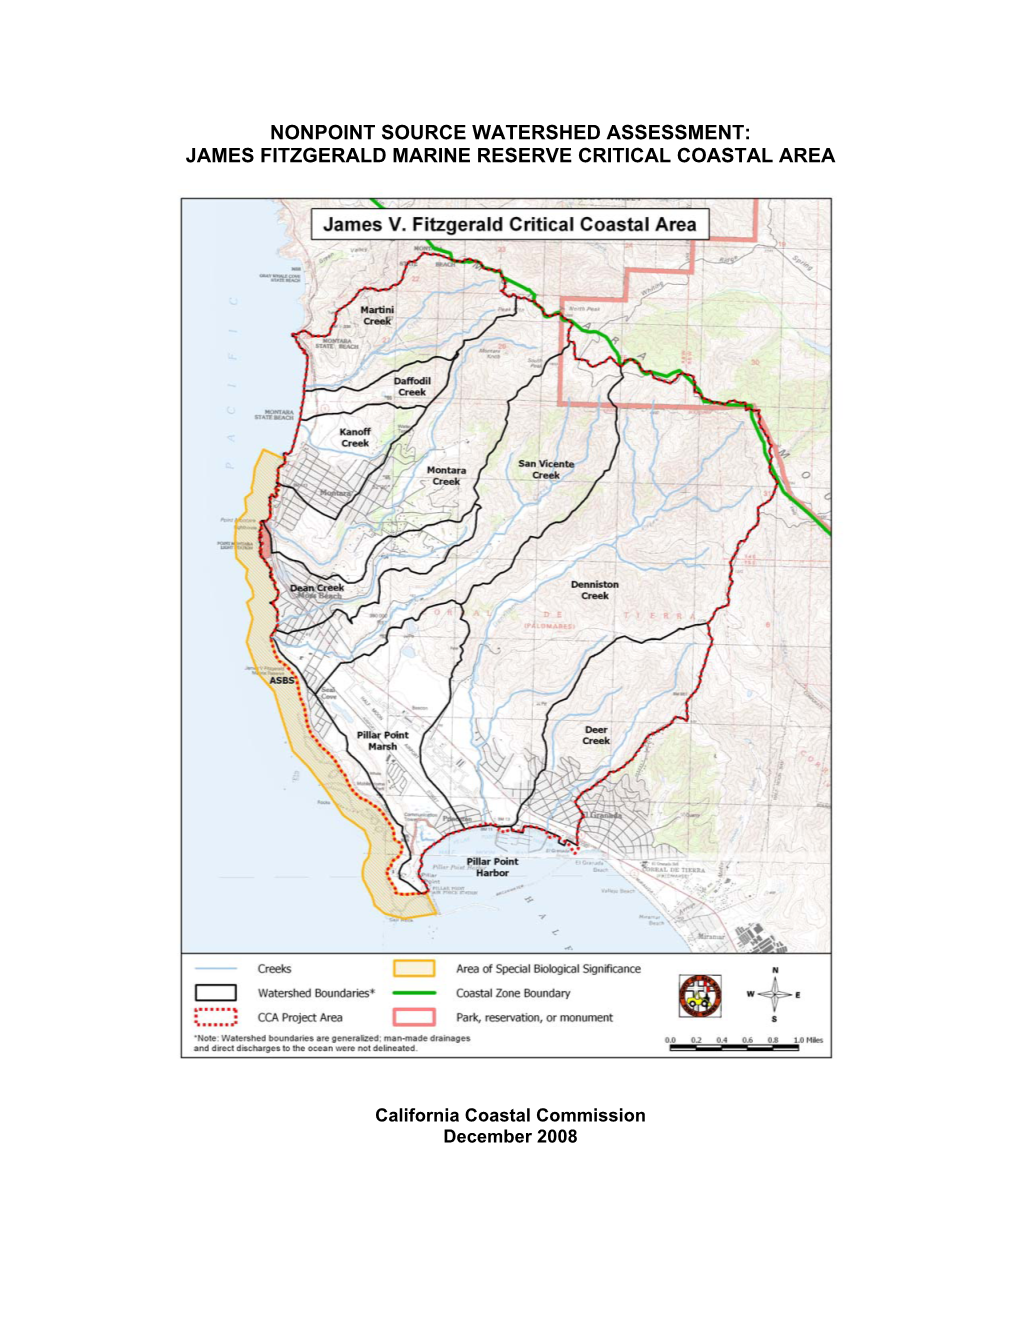 Nonpoint Source Watershed Assessment: James Fitzgerald Marine Reserve Critical Coastal Area